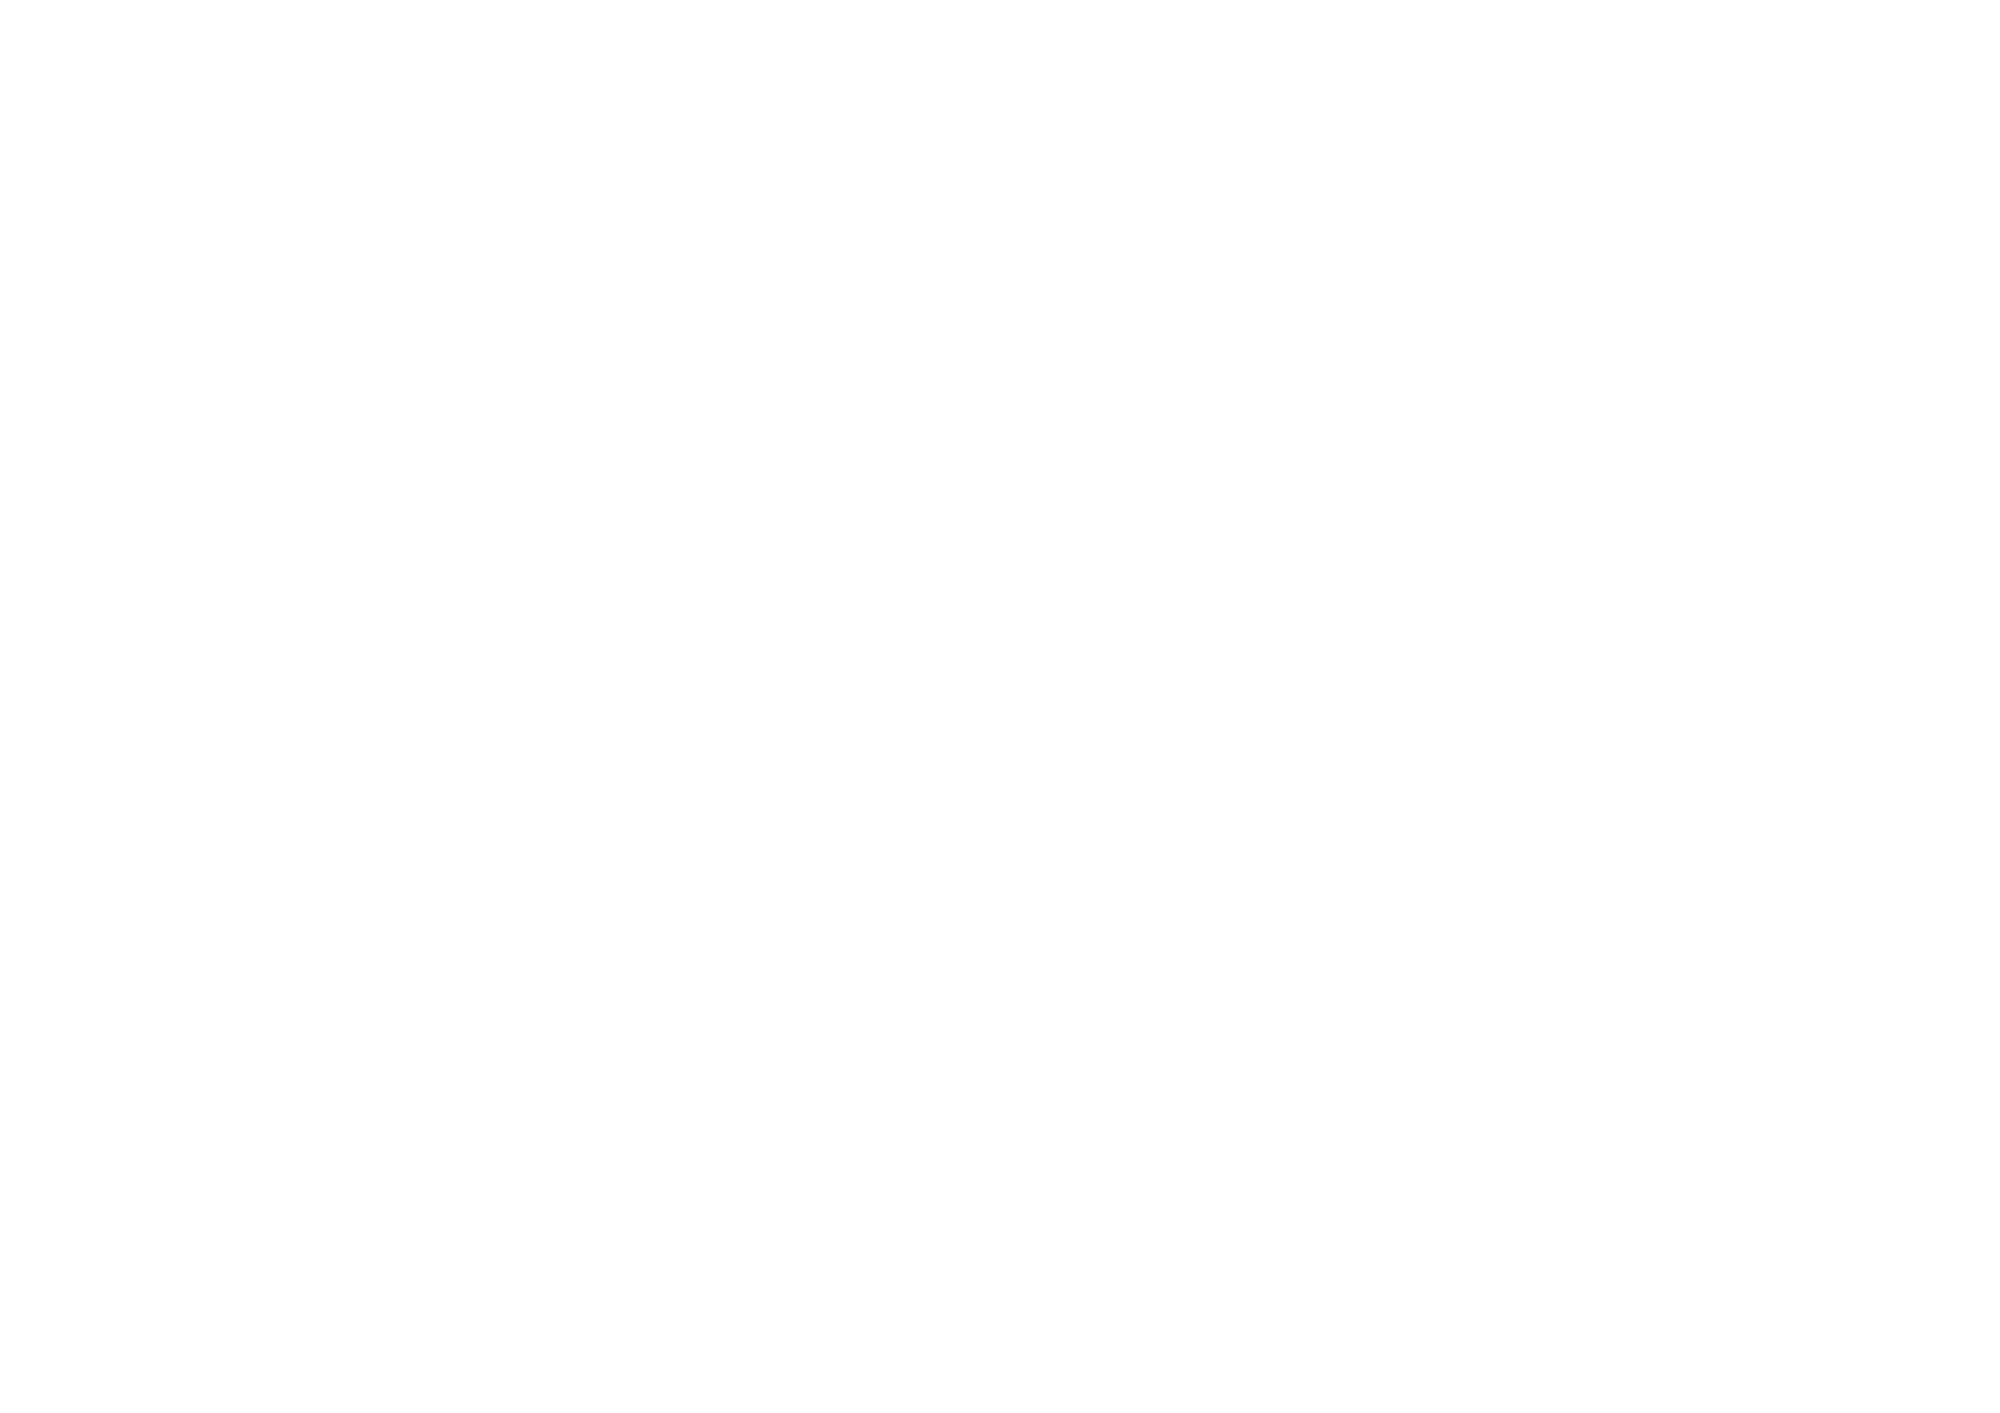 Hillsong conference 2025 logo